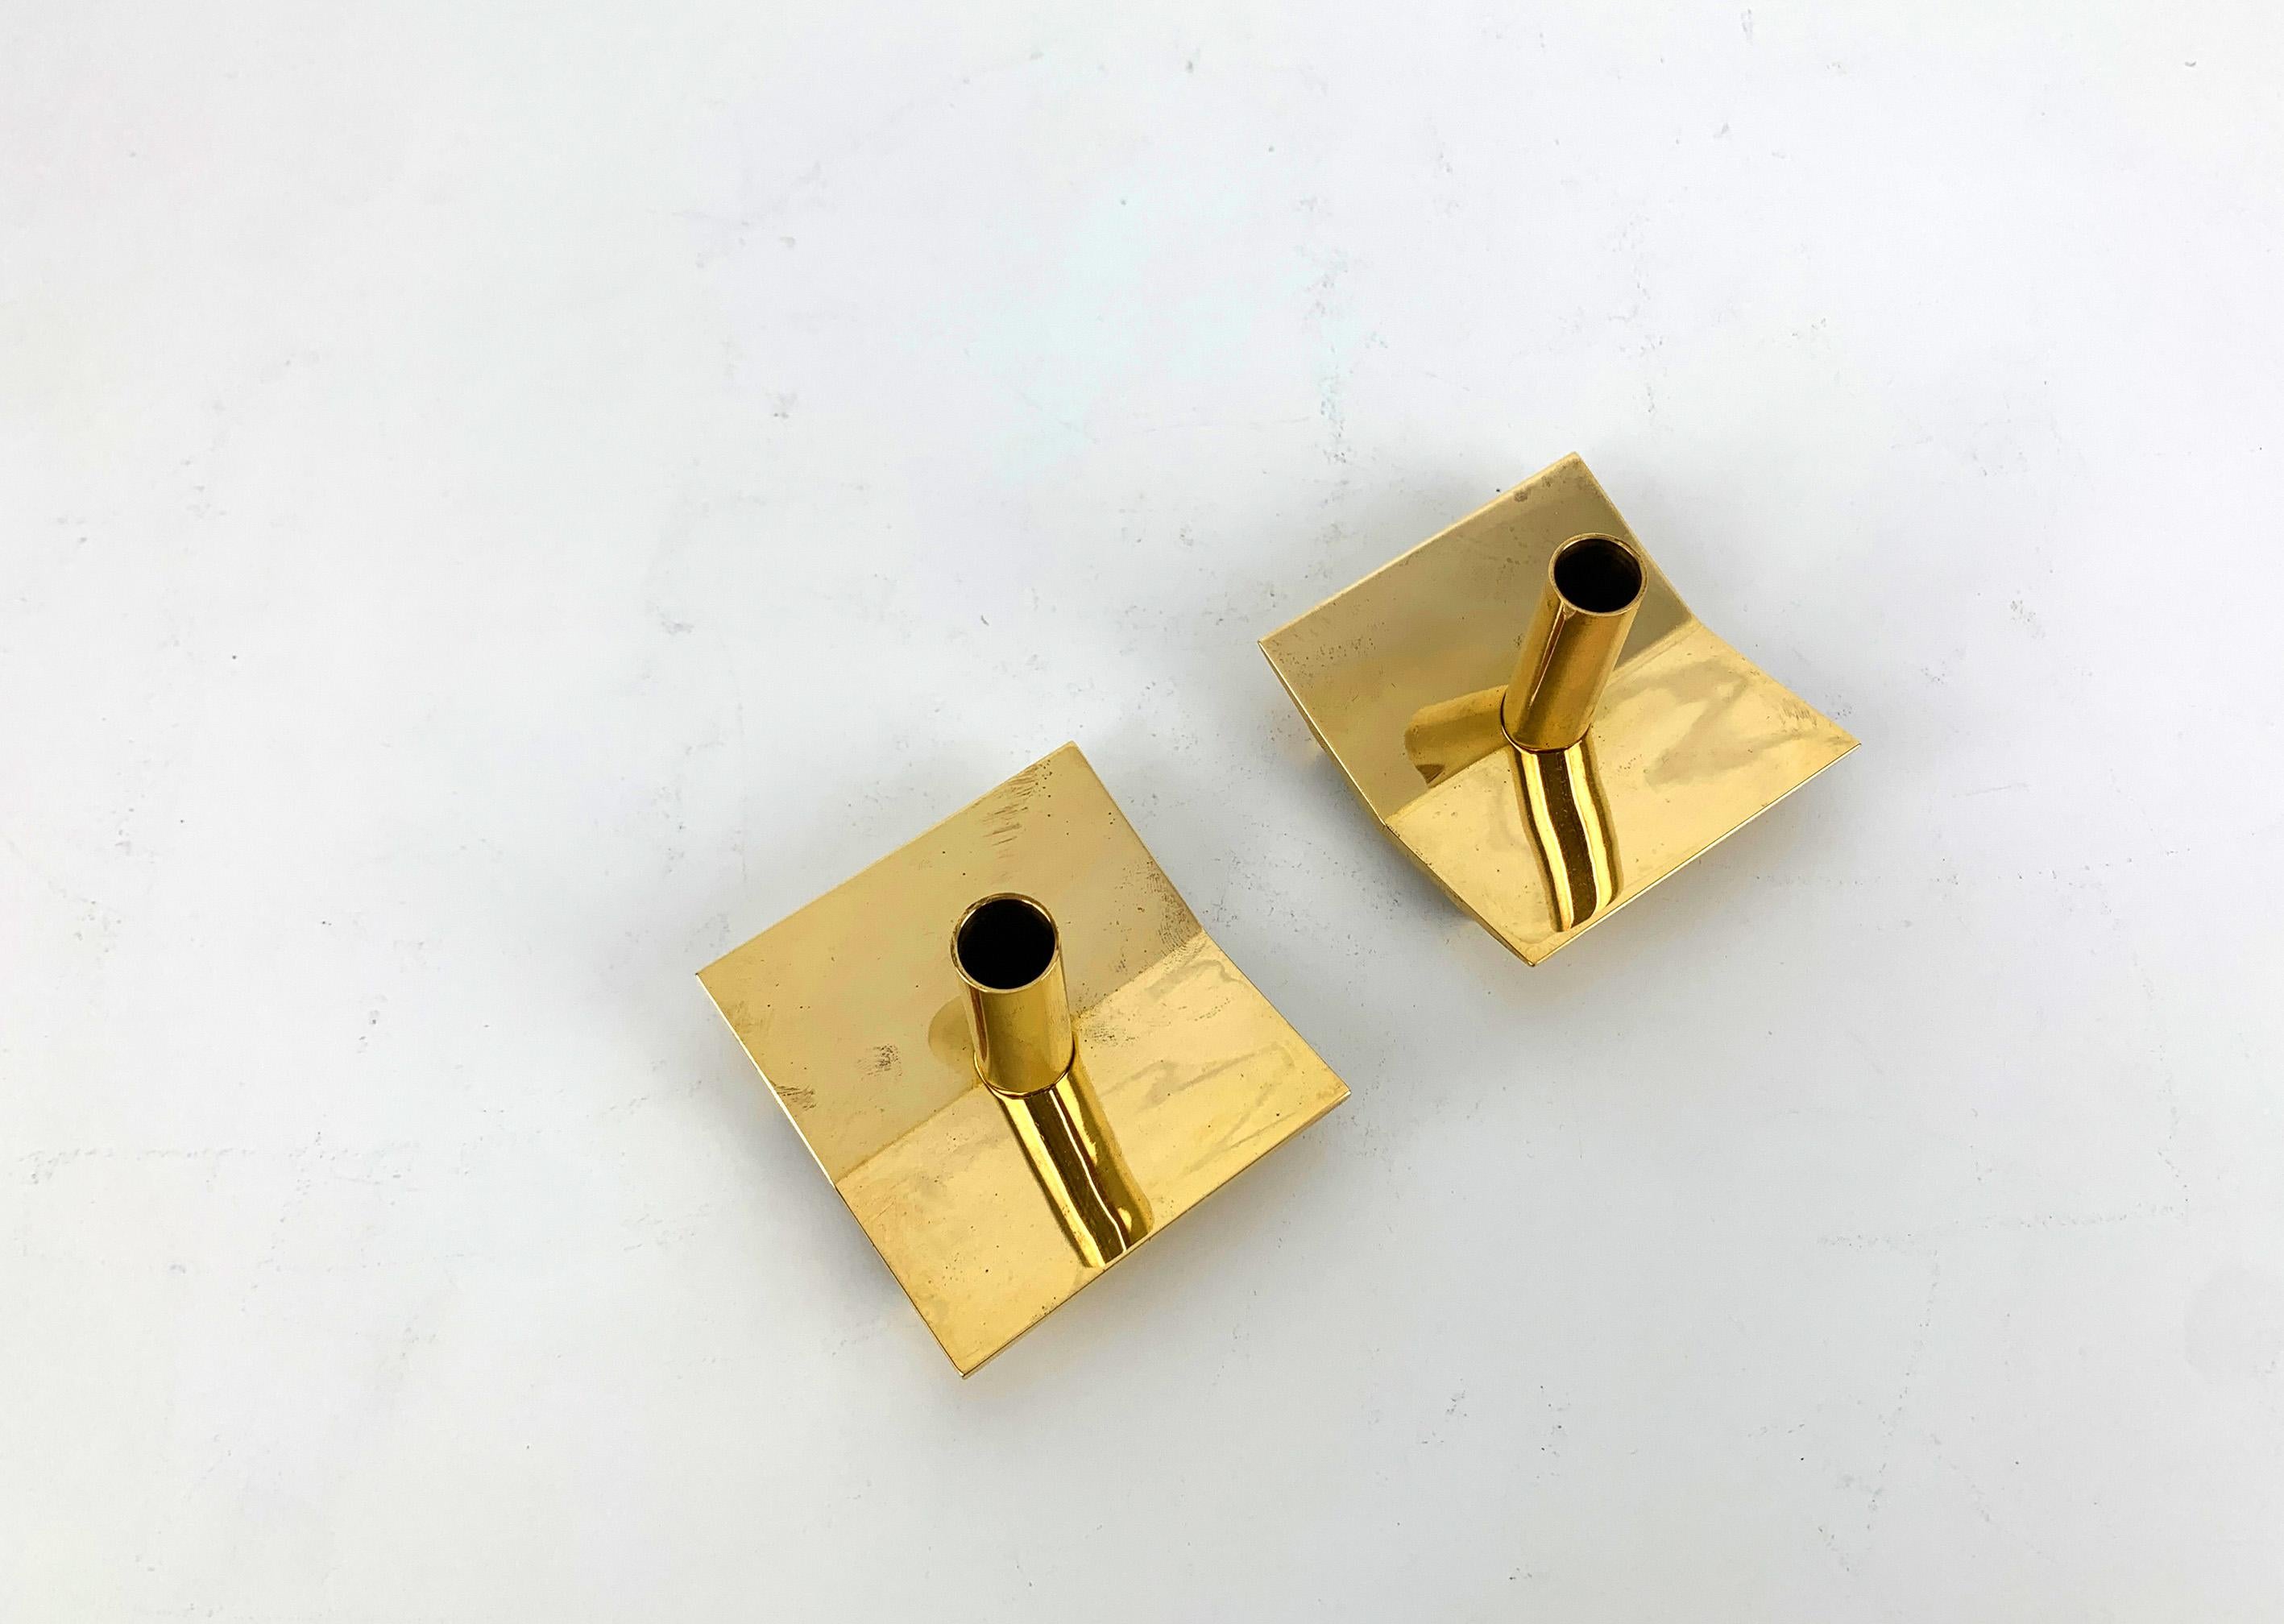 Pair of candle-holders model N°70 for 1 candle by Pierre Forssell, made of solid brass. 

Designed by Pierre Forssell and manufactured in Sweden by Skultuna. The company was founded by King Carl IX of Sweden in 1607. Pierre Forsell worked between